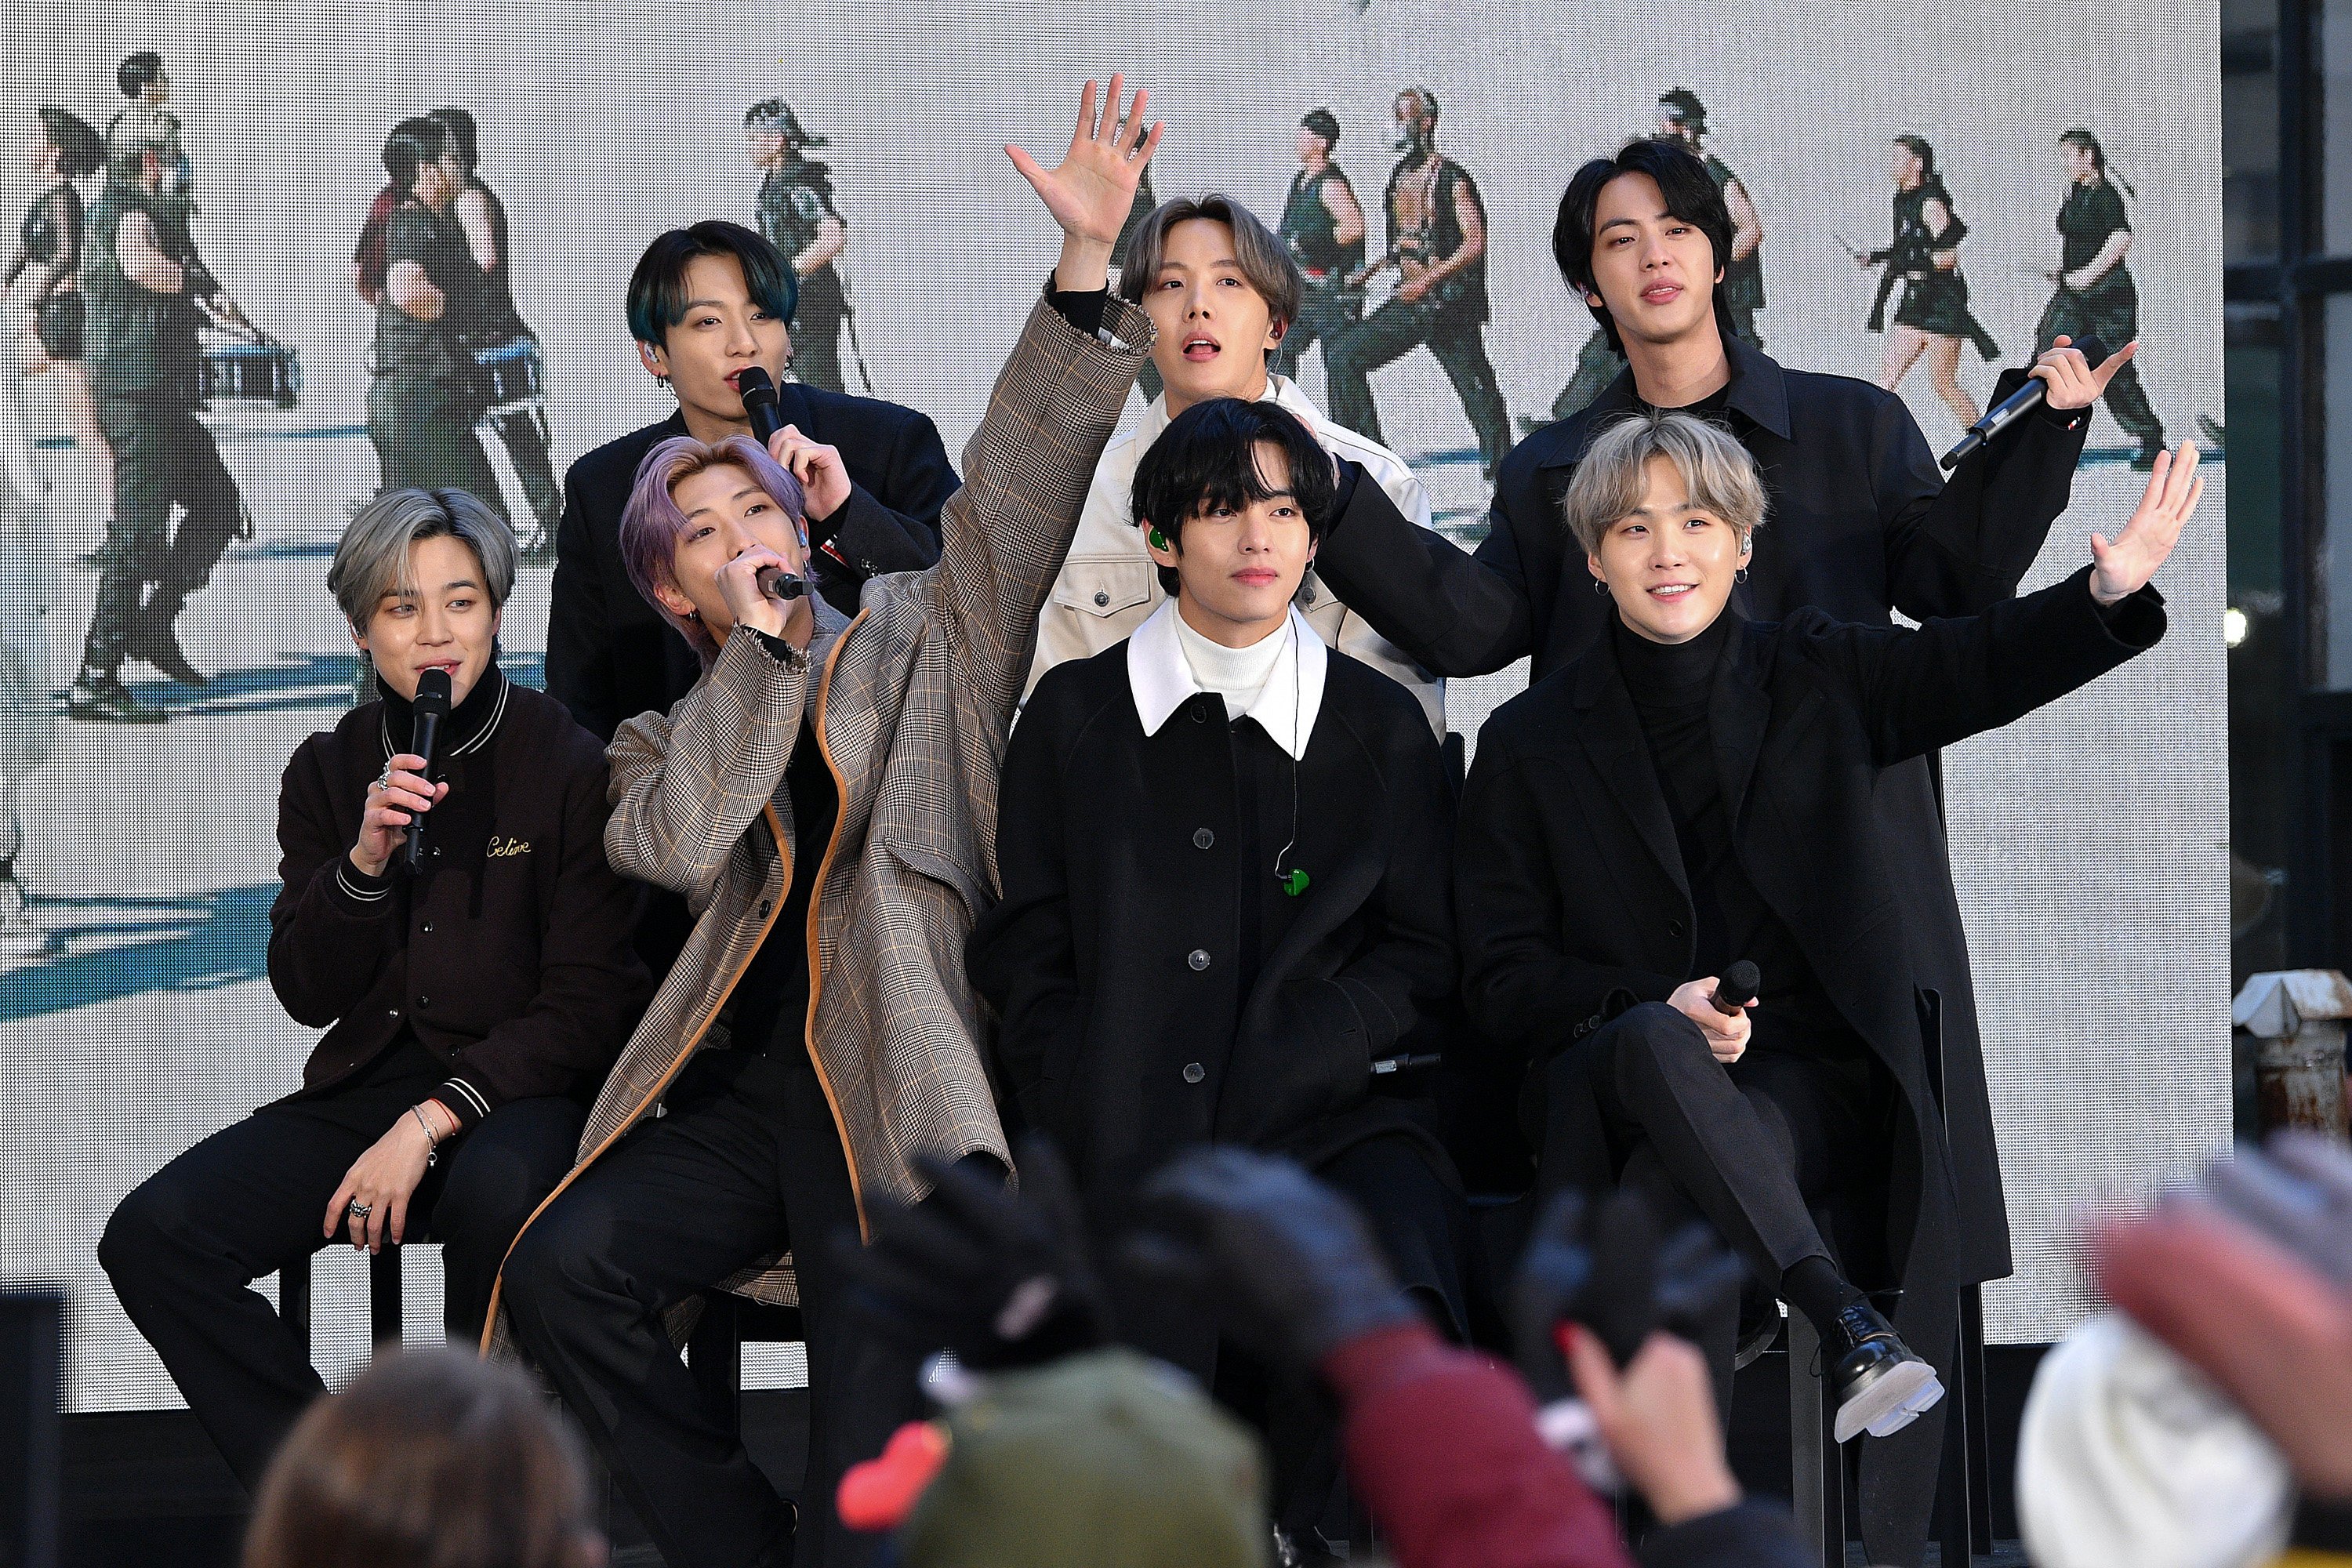 K-pop boy band BTS visit the “Today” Show at Rockefeller Plaza in New York in 2020. Photo: Getty Images